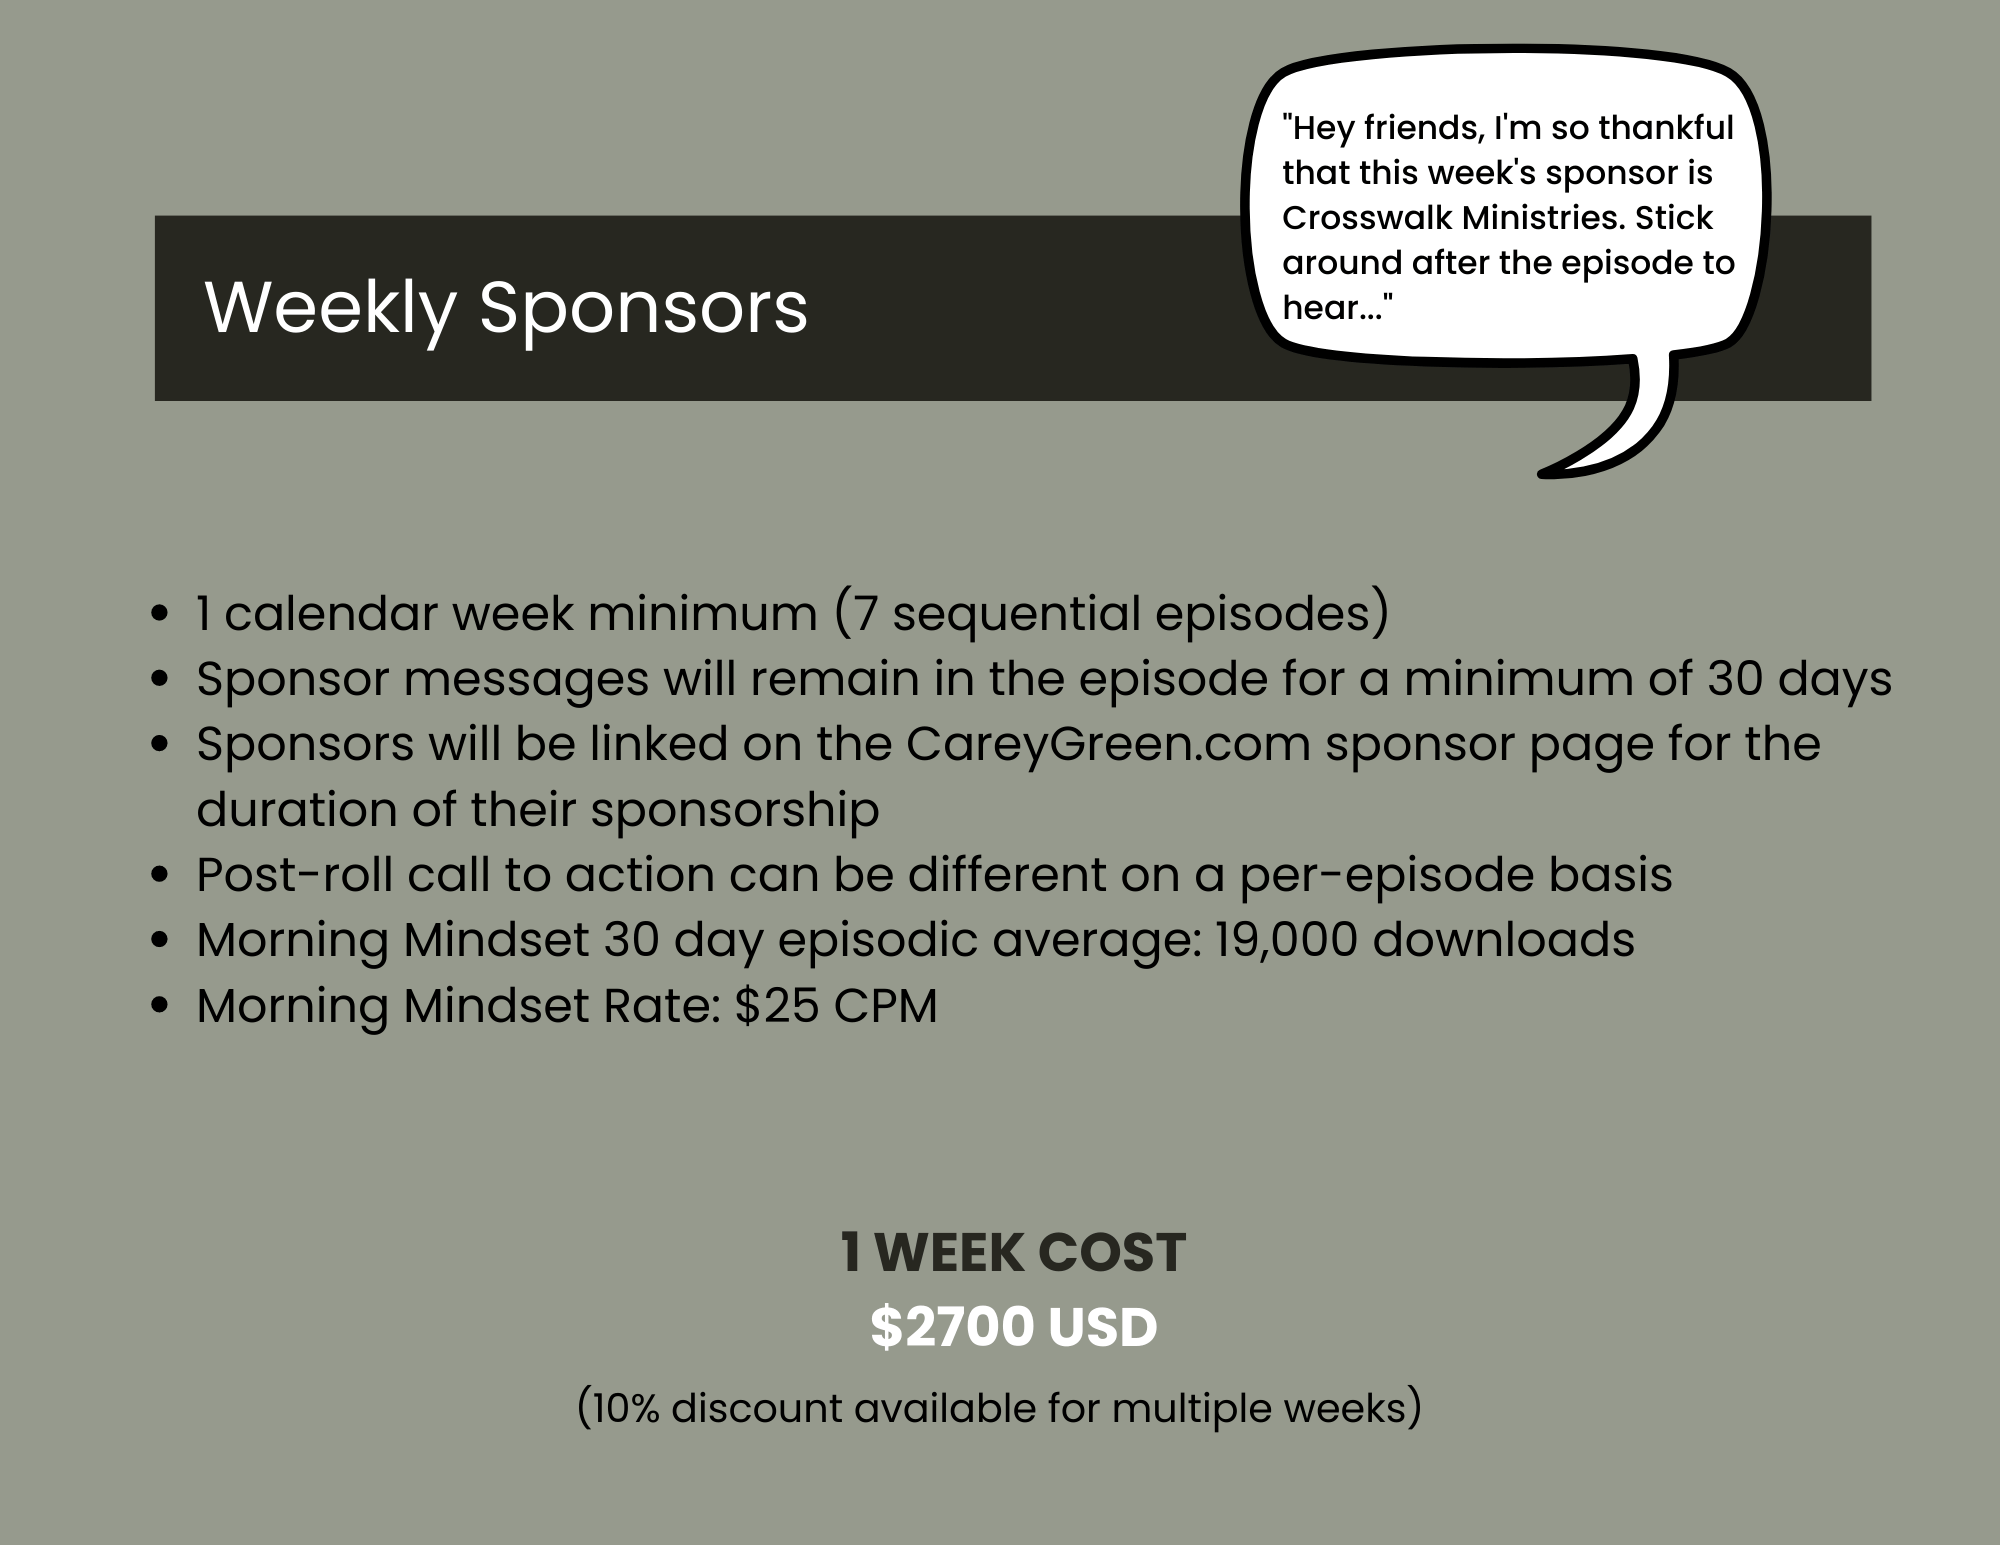 Weekly sponsorship rates - the Morning Mindset Daily Christian Devotional podcast